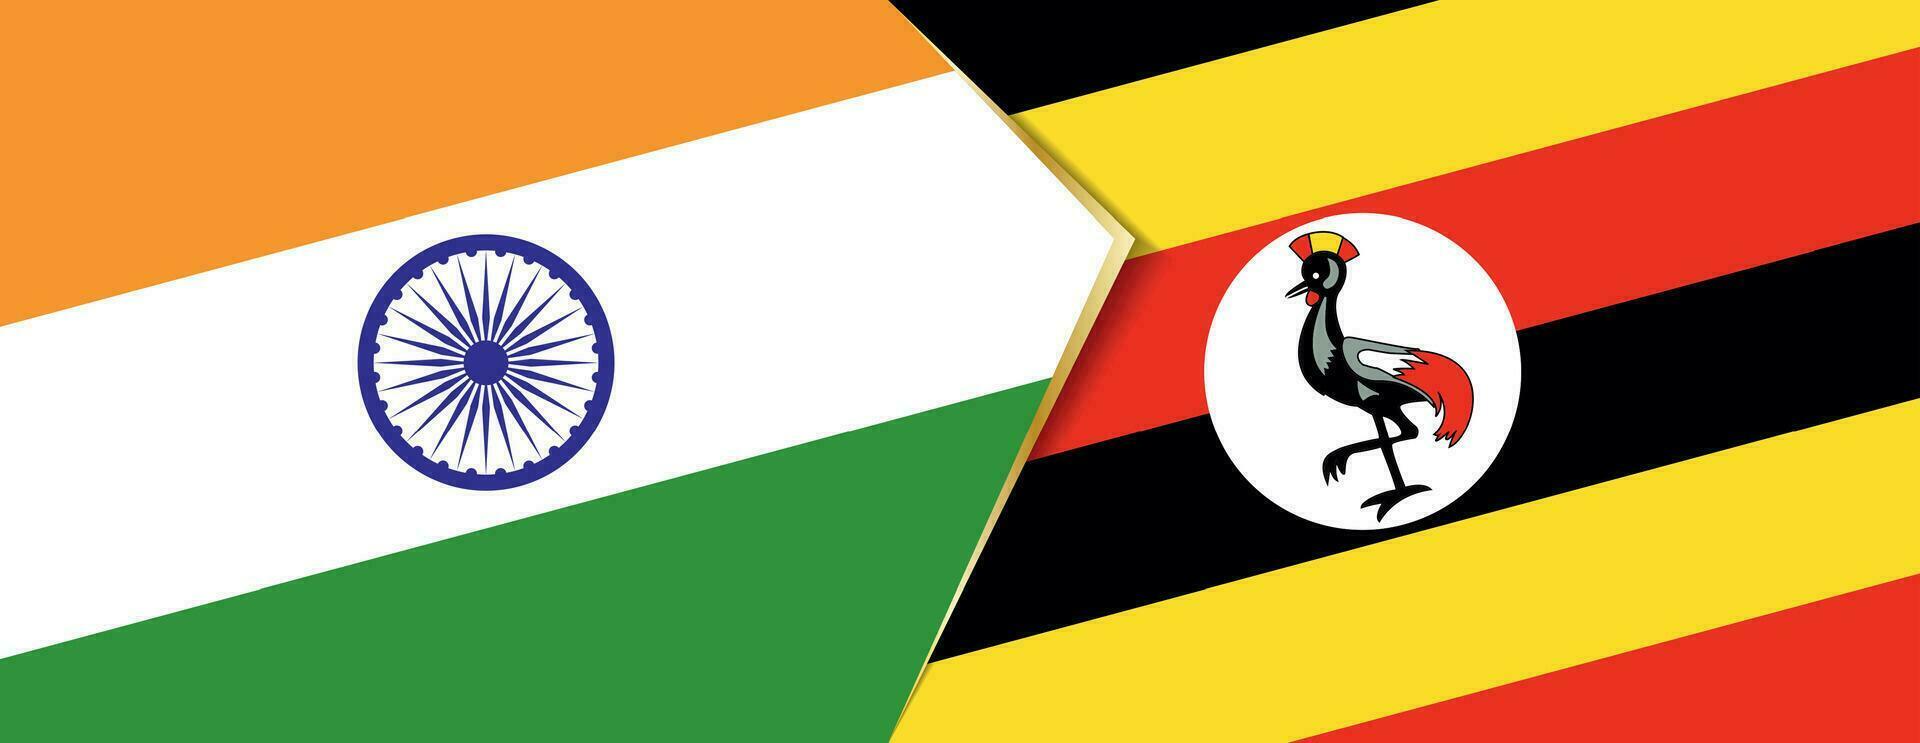 India and Uganda flags, two vector flags.